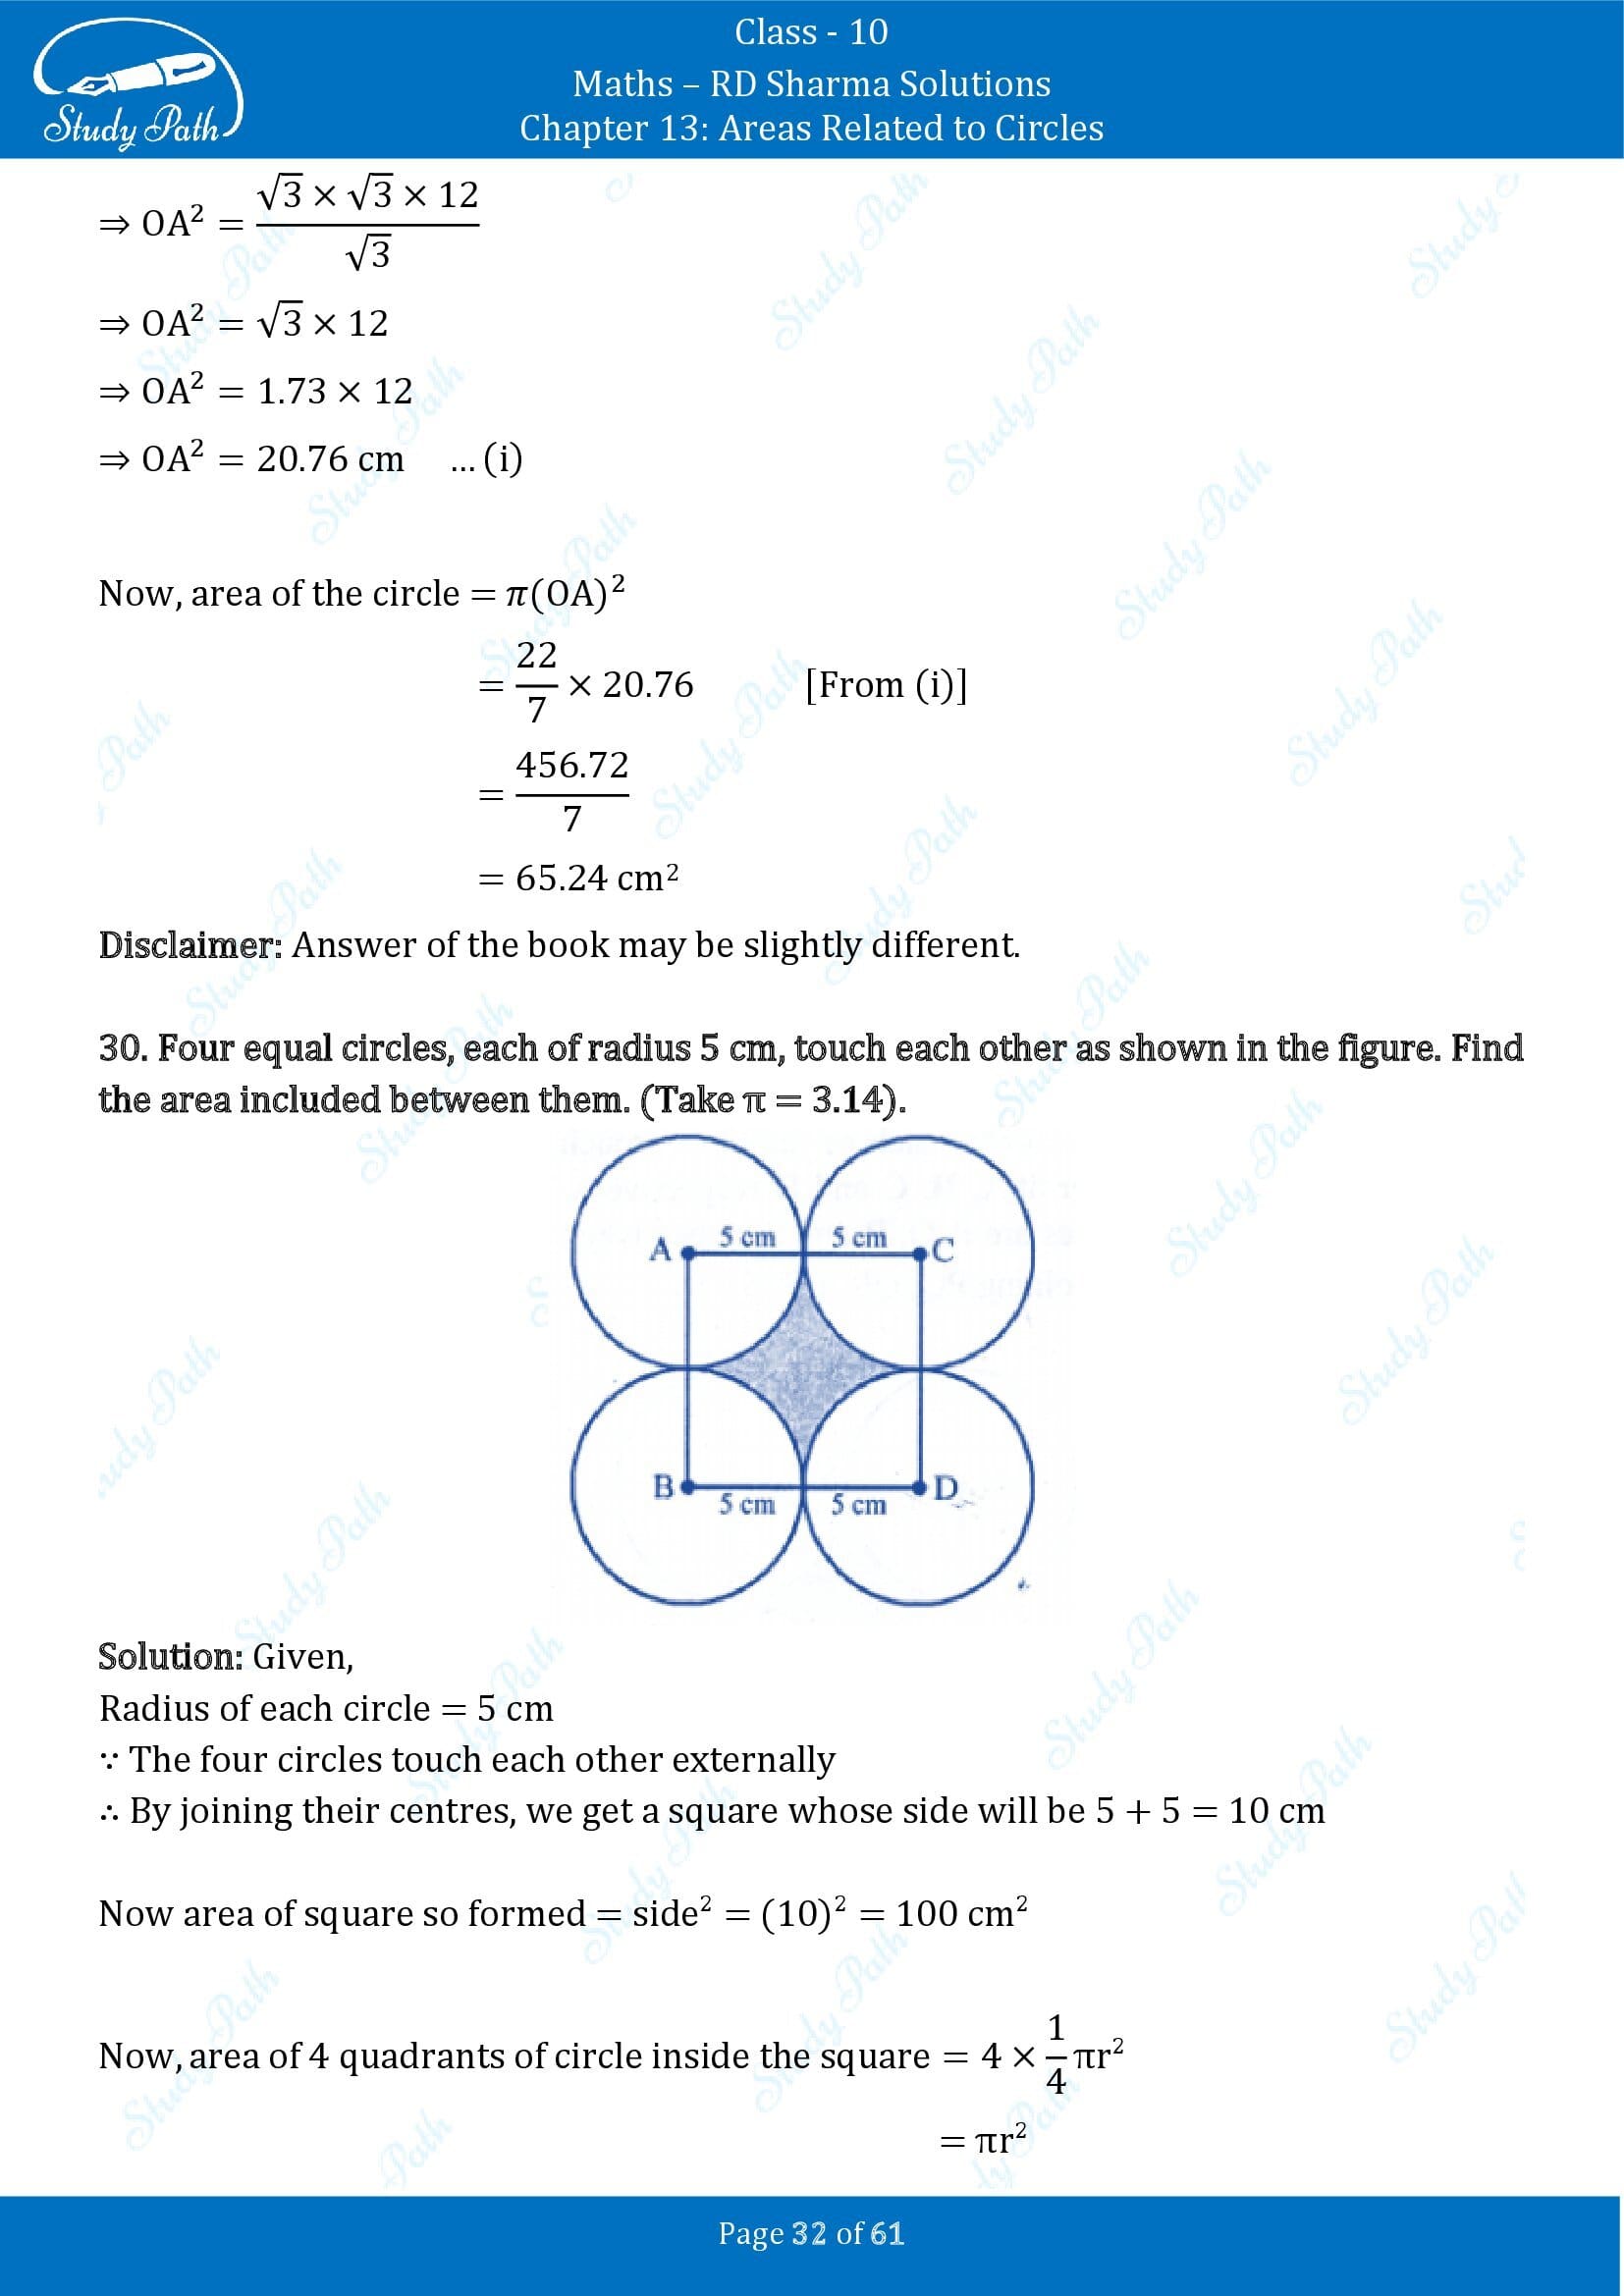 RD Sharma Solutions Class 10 Chapter 13 Areas Related to Circles Exercise 13.4 00032